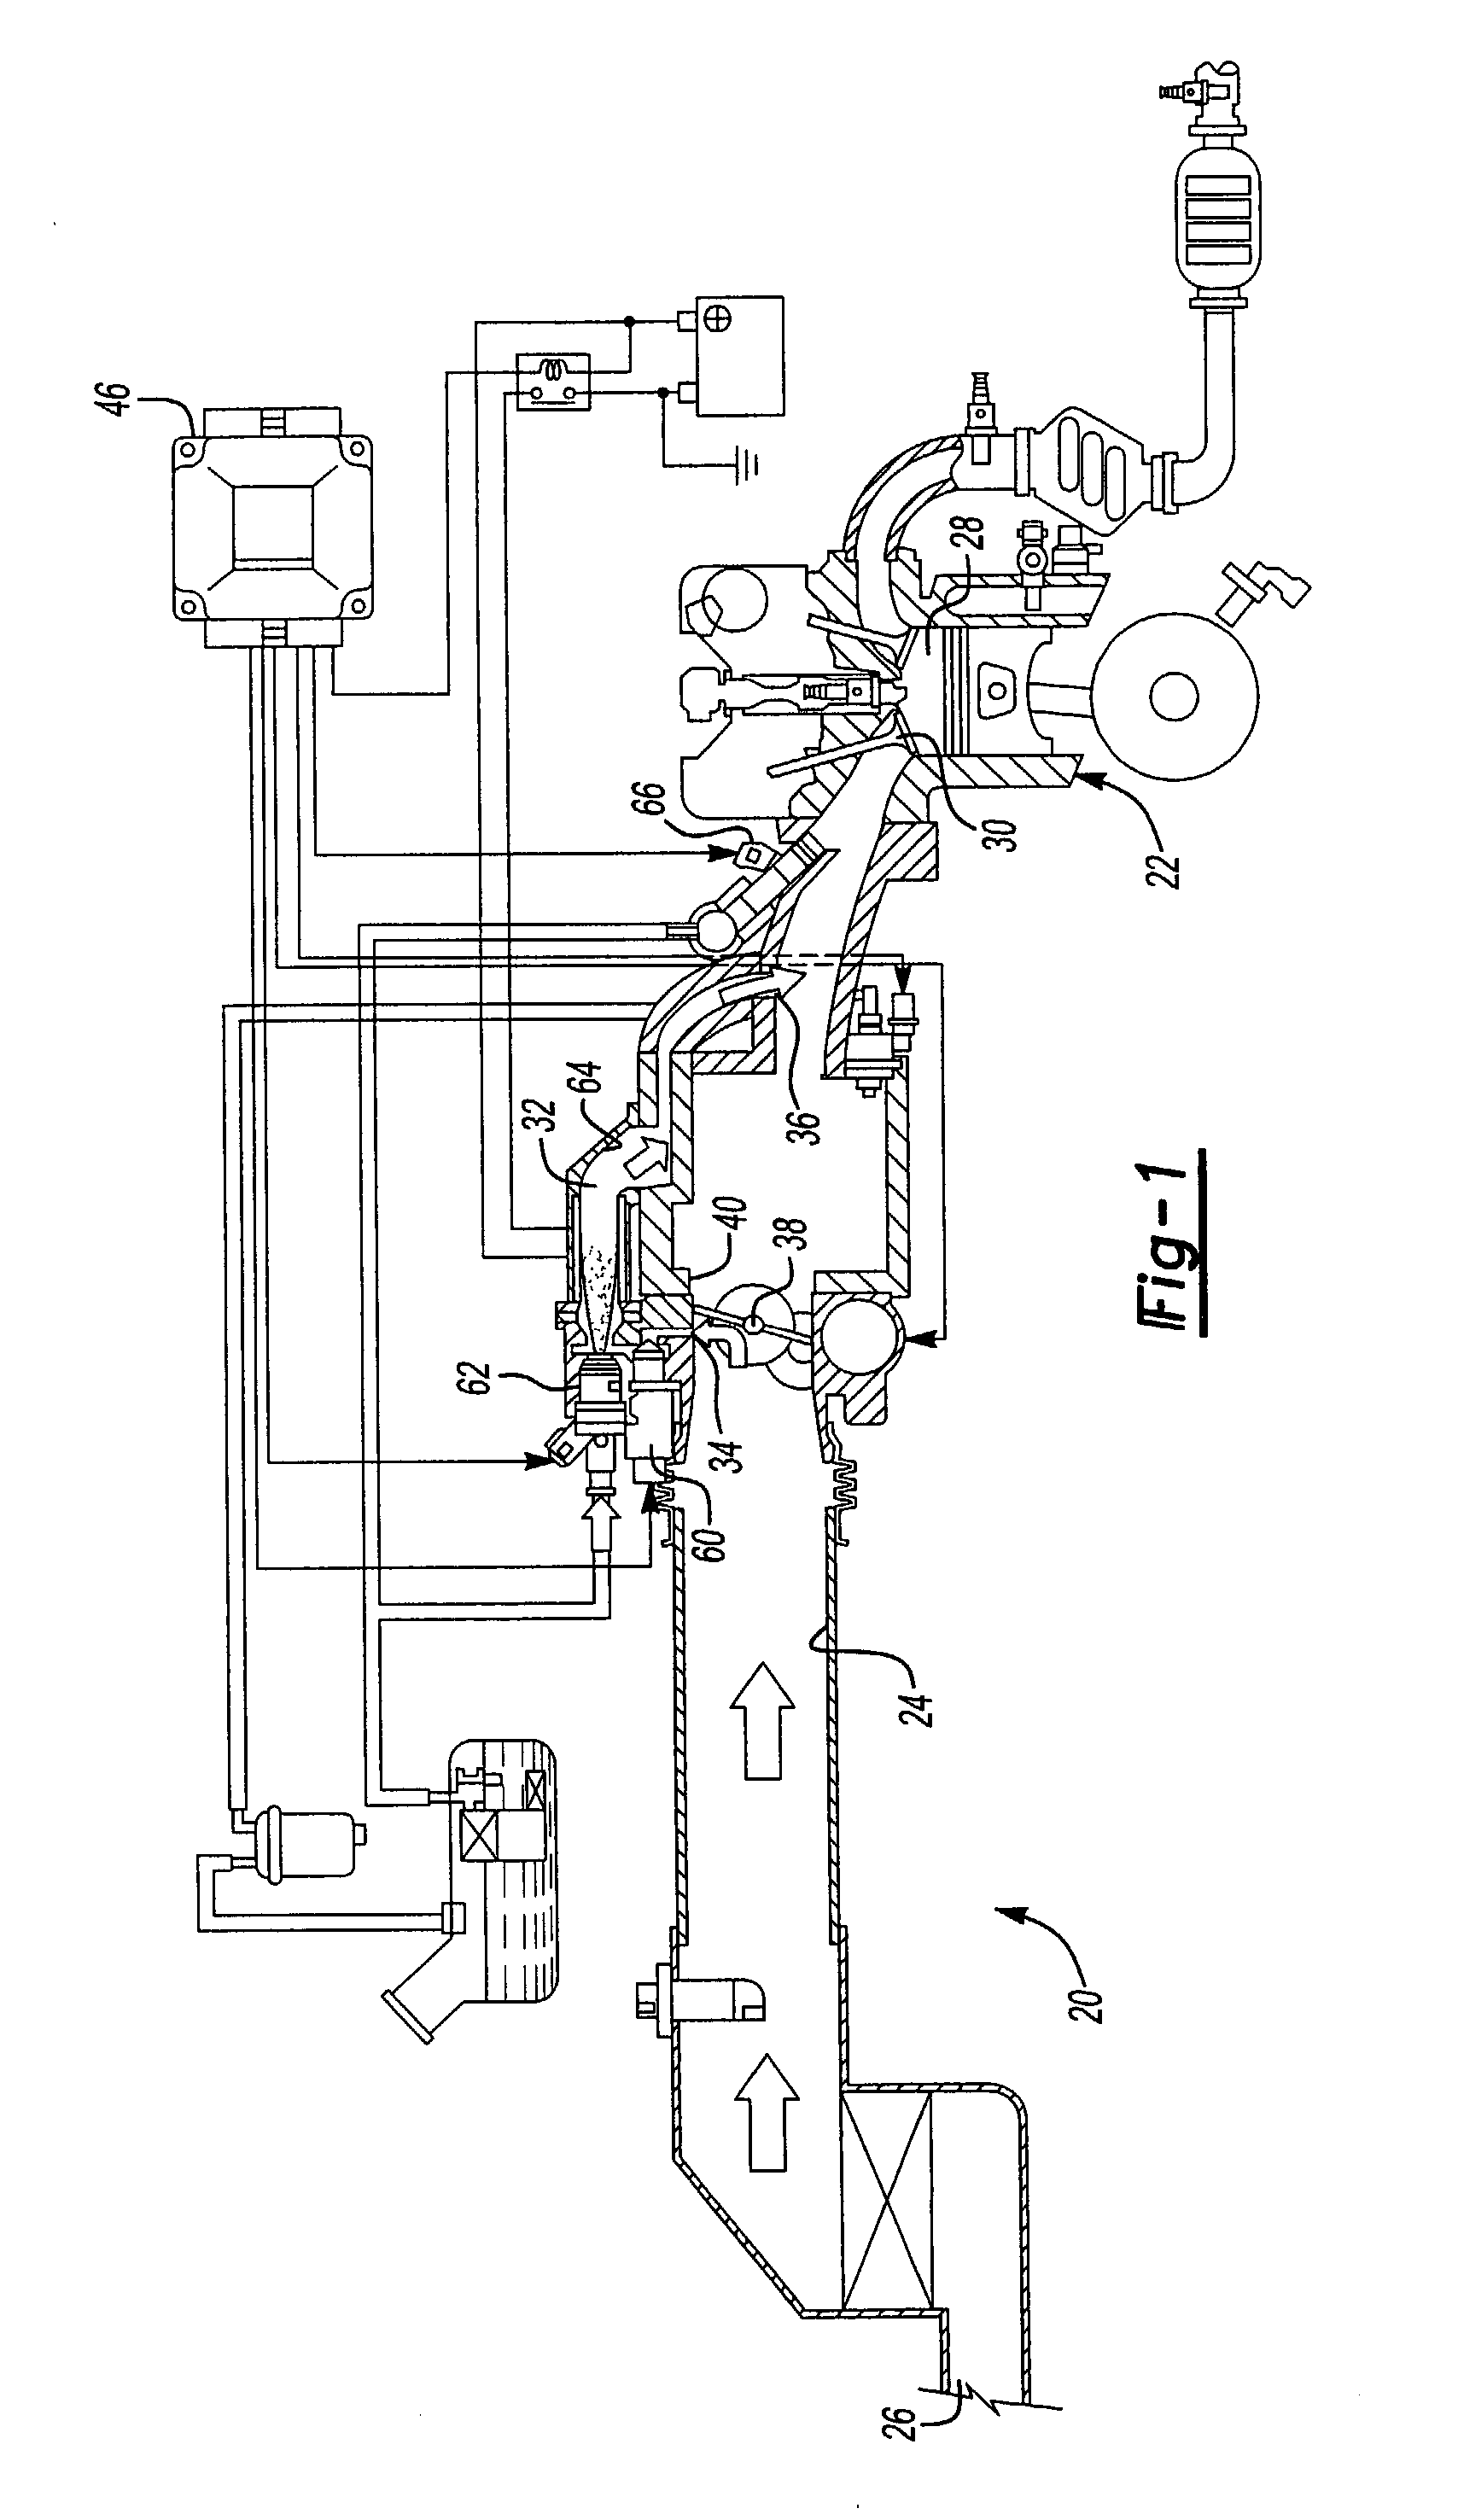 Fuel delivery system for an internal combustion engine